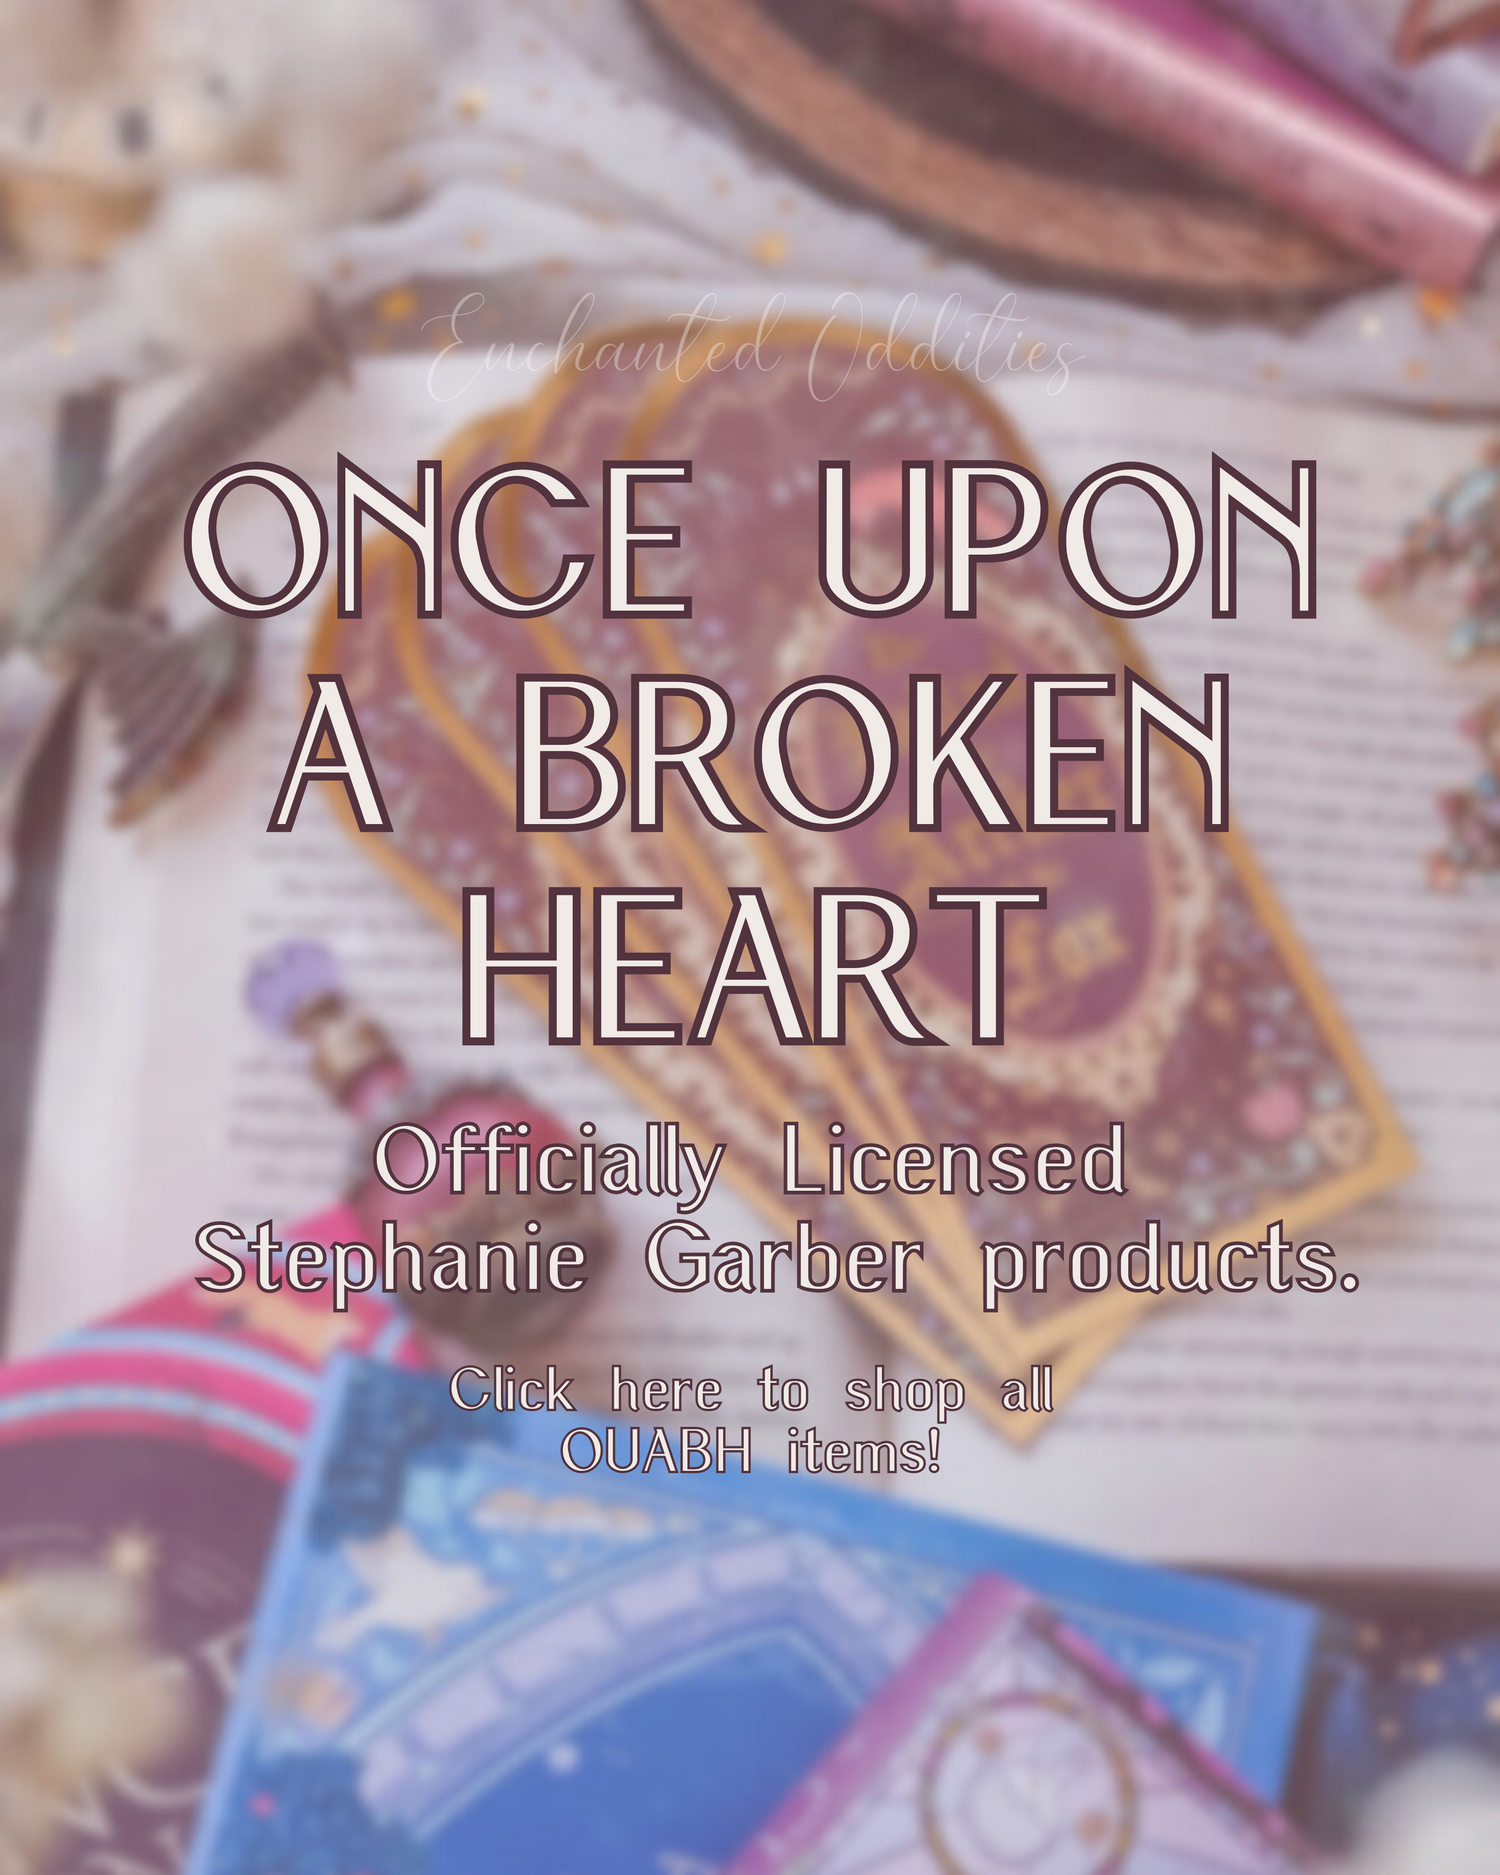 ♡ ONCE UPON A BROKEN HEART COLLECTION ♡